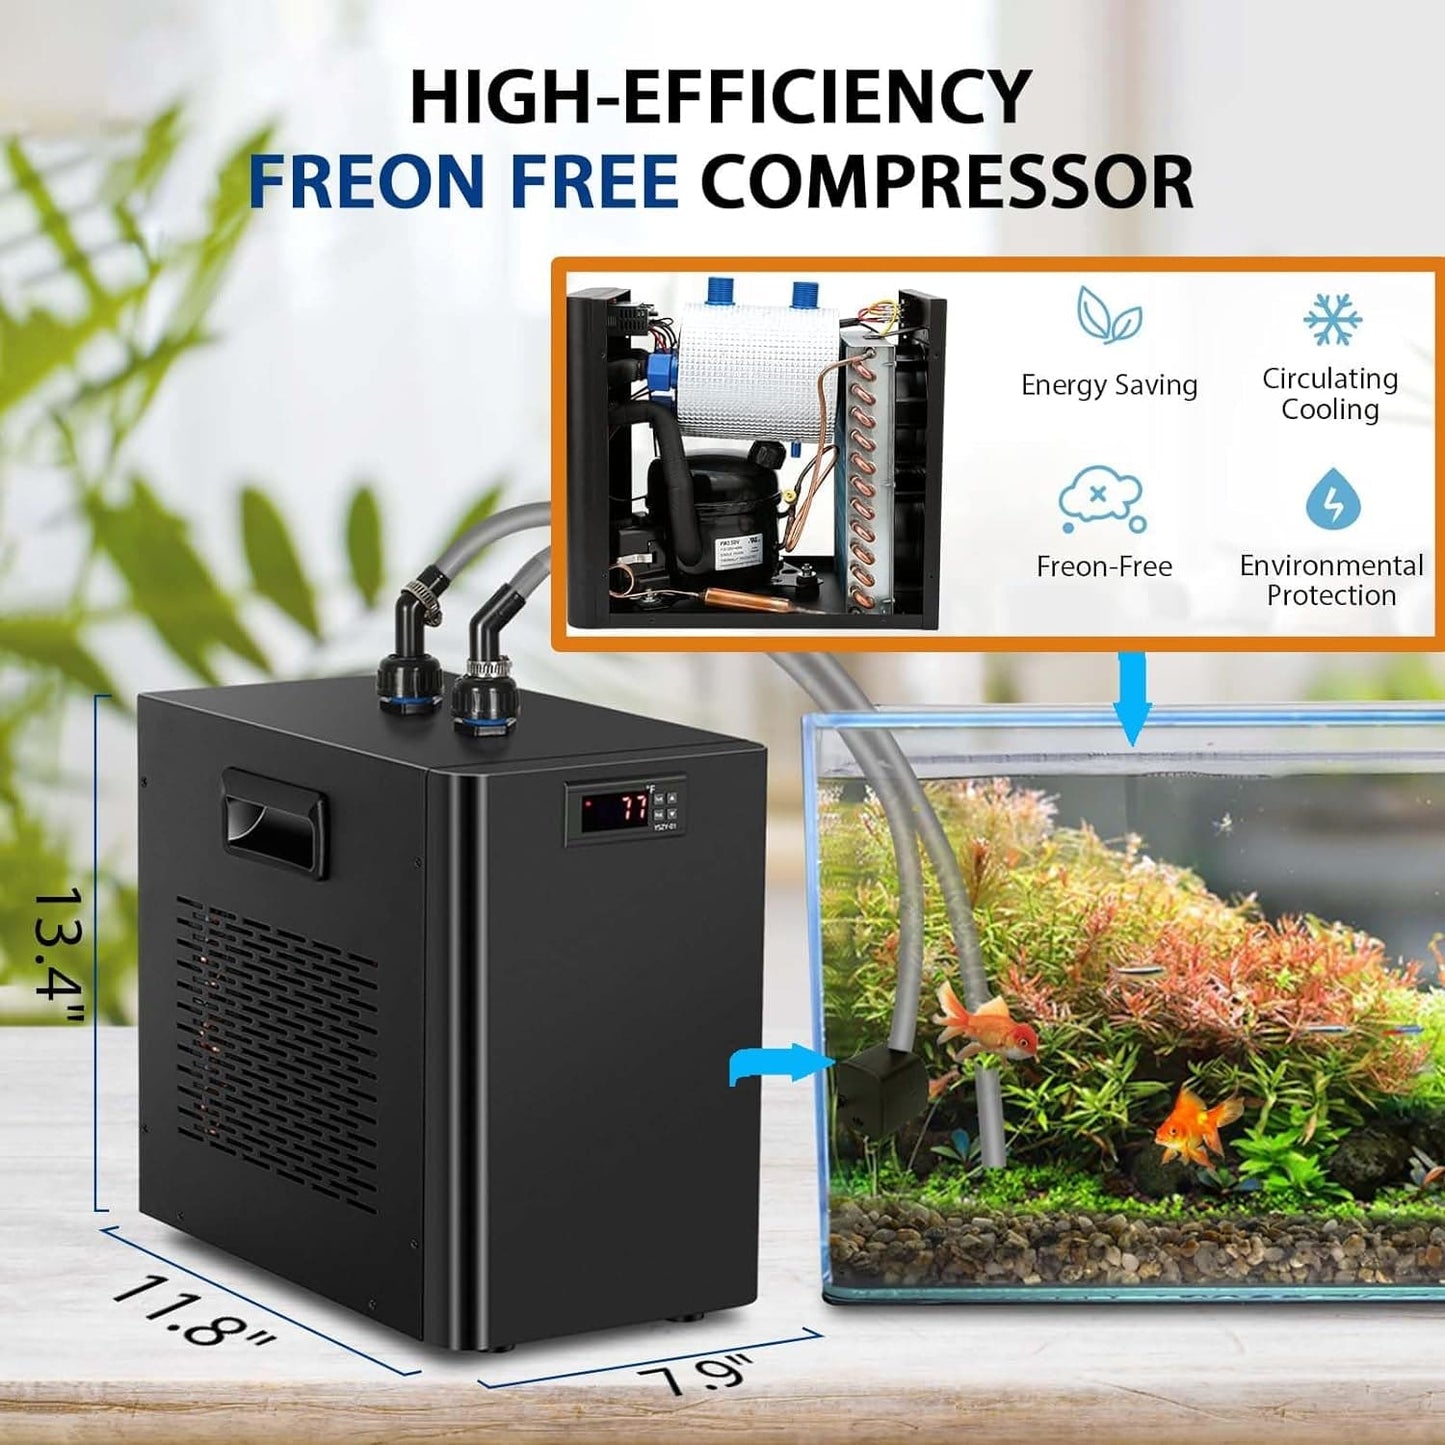 Aquarium Chiller 42Gal 1/10 HP Fish Tank Water Chillers with Special Quiet Design Refrigeration Compressor for Hydroponics System Axolotl Jellyfish Coral Reef 160L, 42Gal/160L